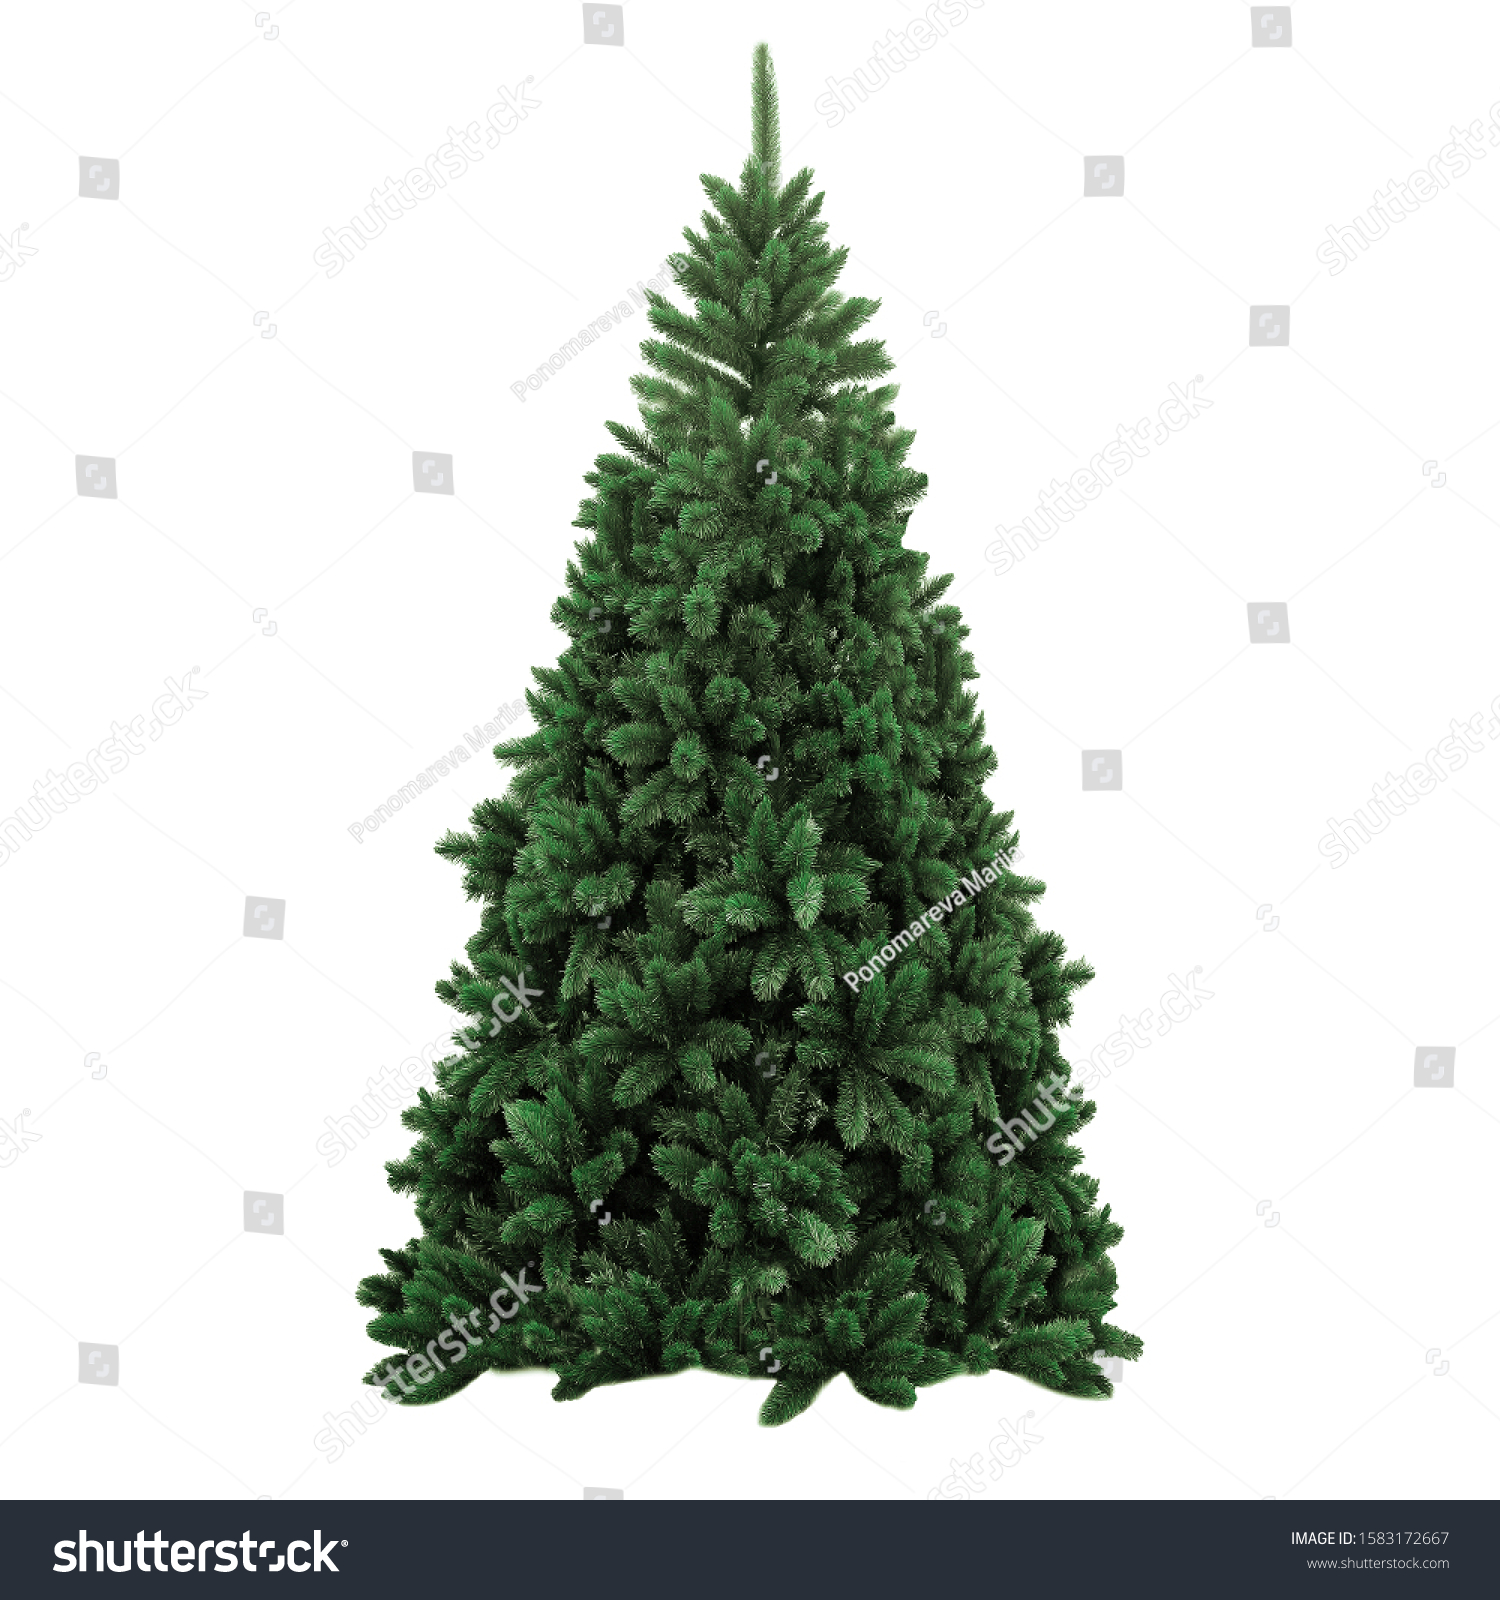 Christmas tree on a white background without decorations #1583172667